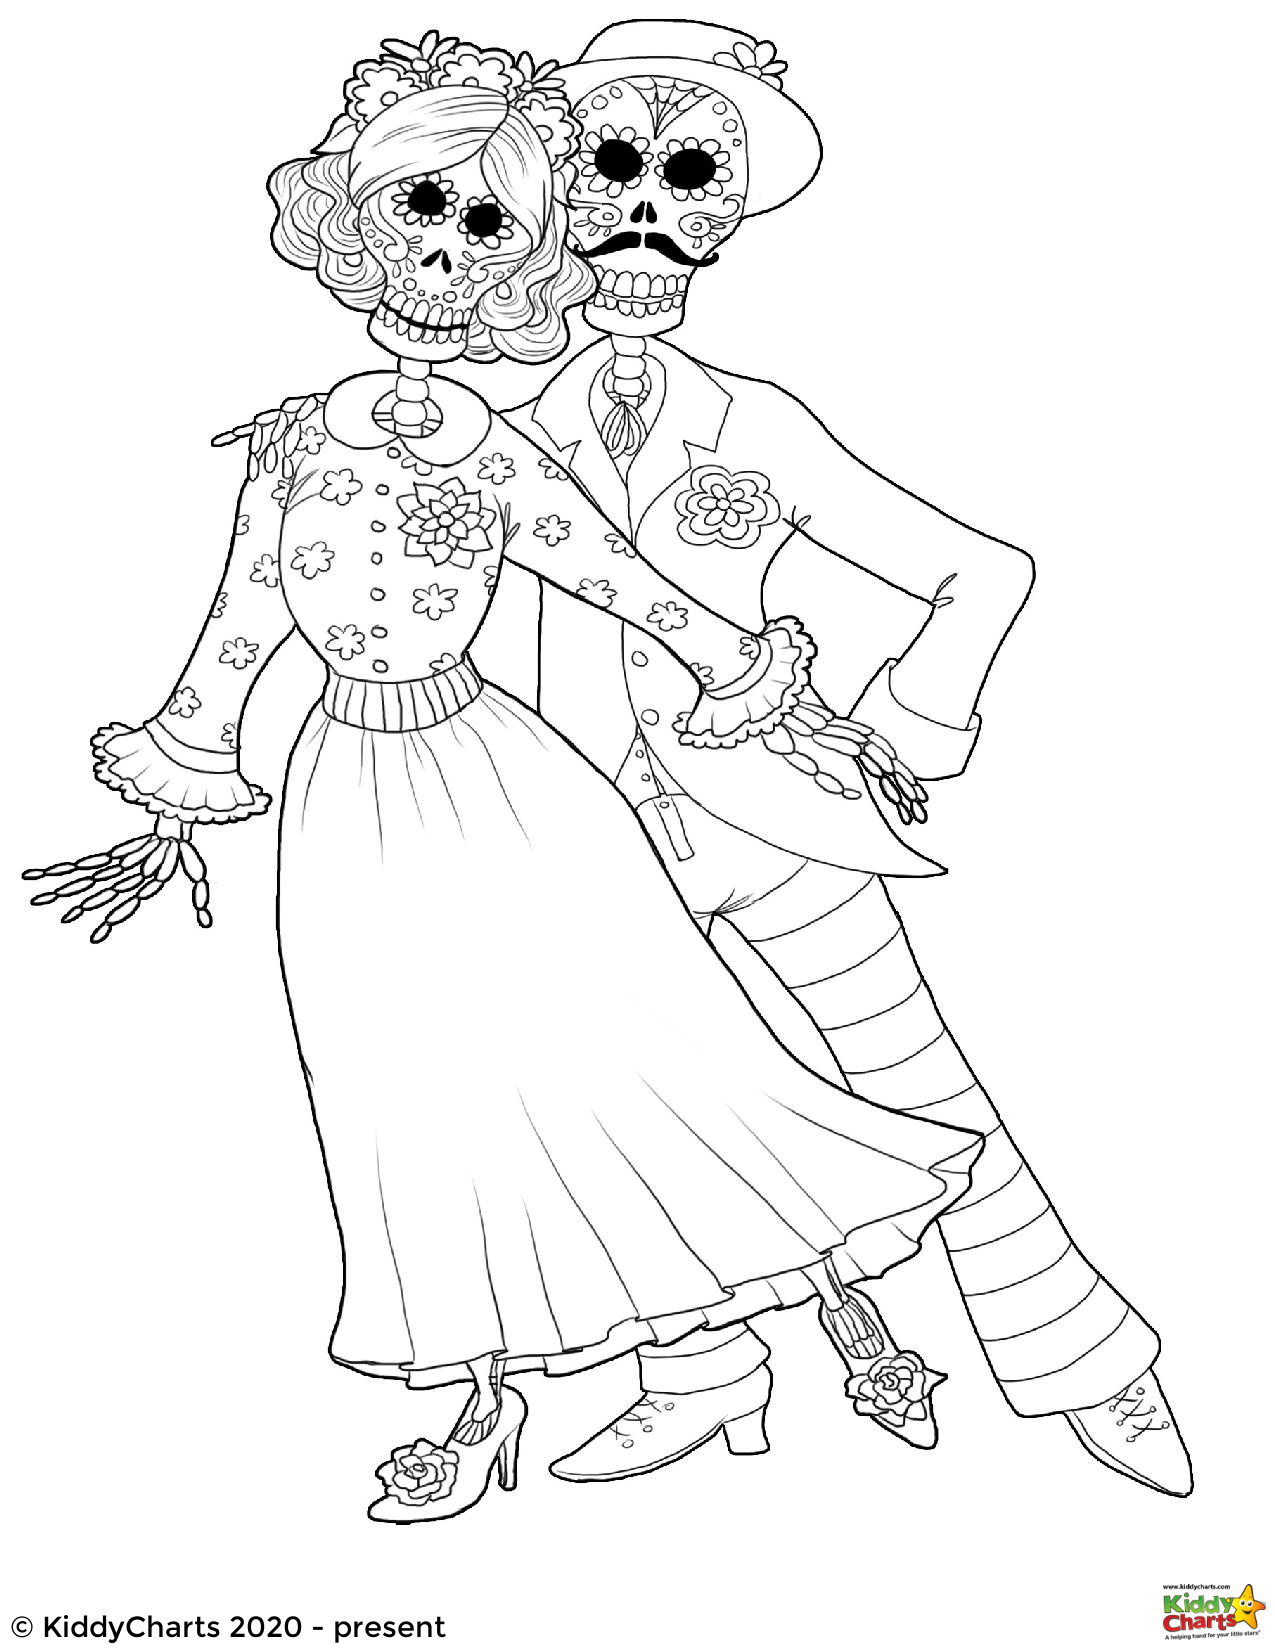 Day of the Dead Coloring Book - Printable - kiddycharts.com